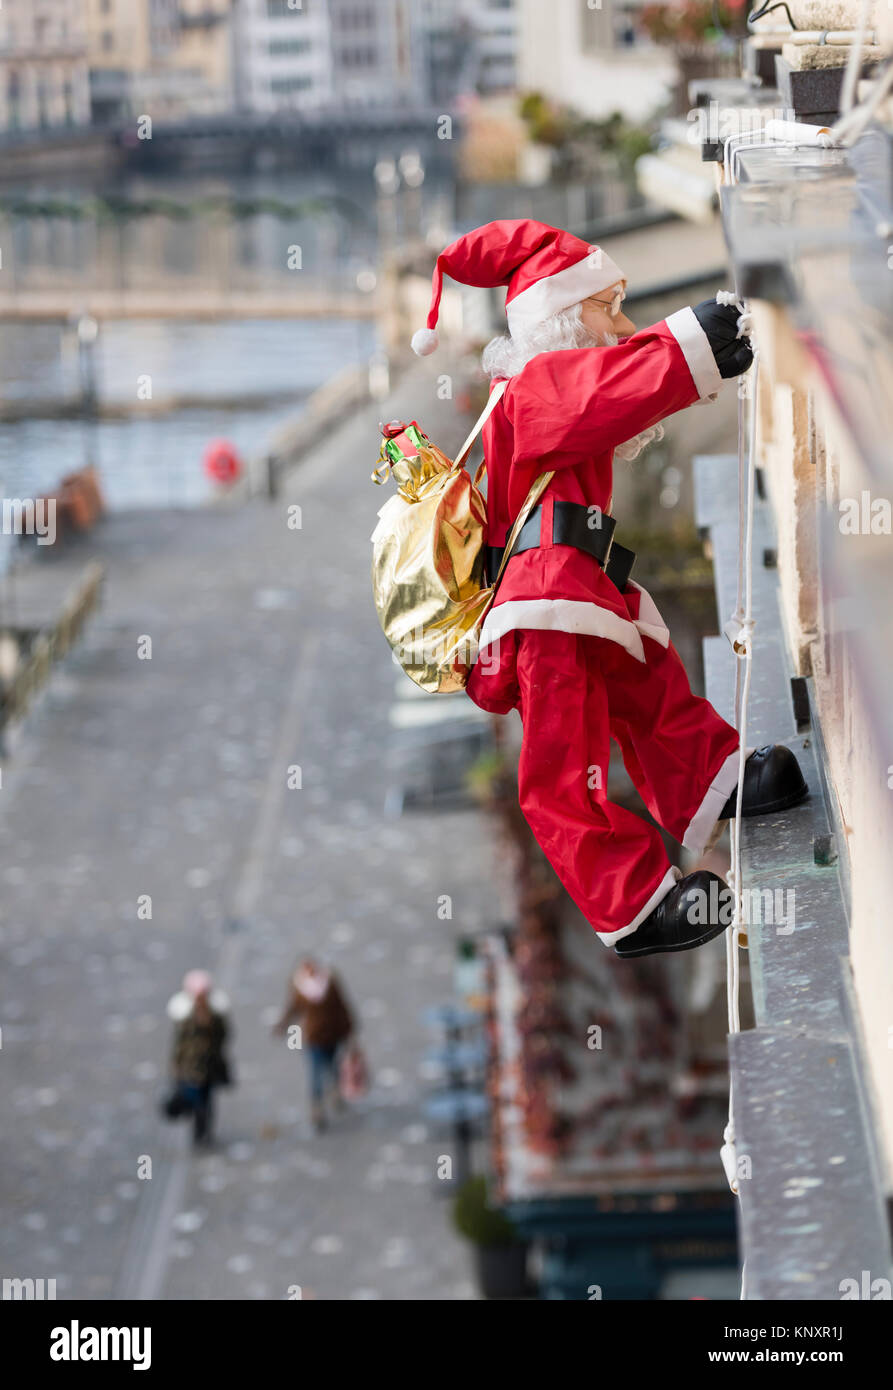 Lucerne, Switzerland - 3 Dec 2017: As Christmas decorations, a Santa Claus puppet with Christmas presents is climbing up the facade of a house at Luce Stock Photo